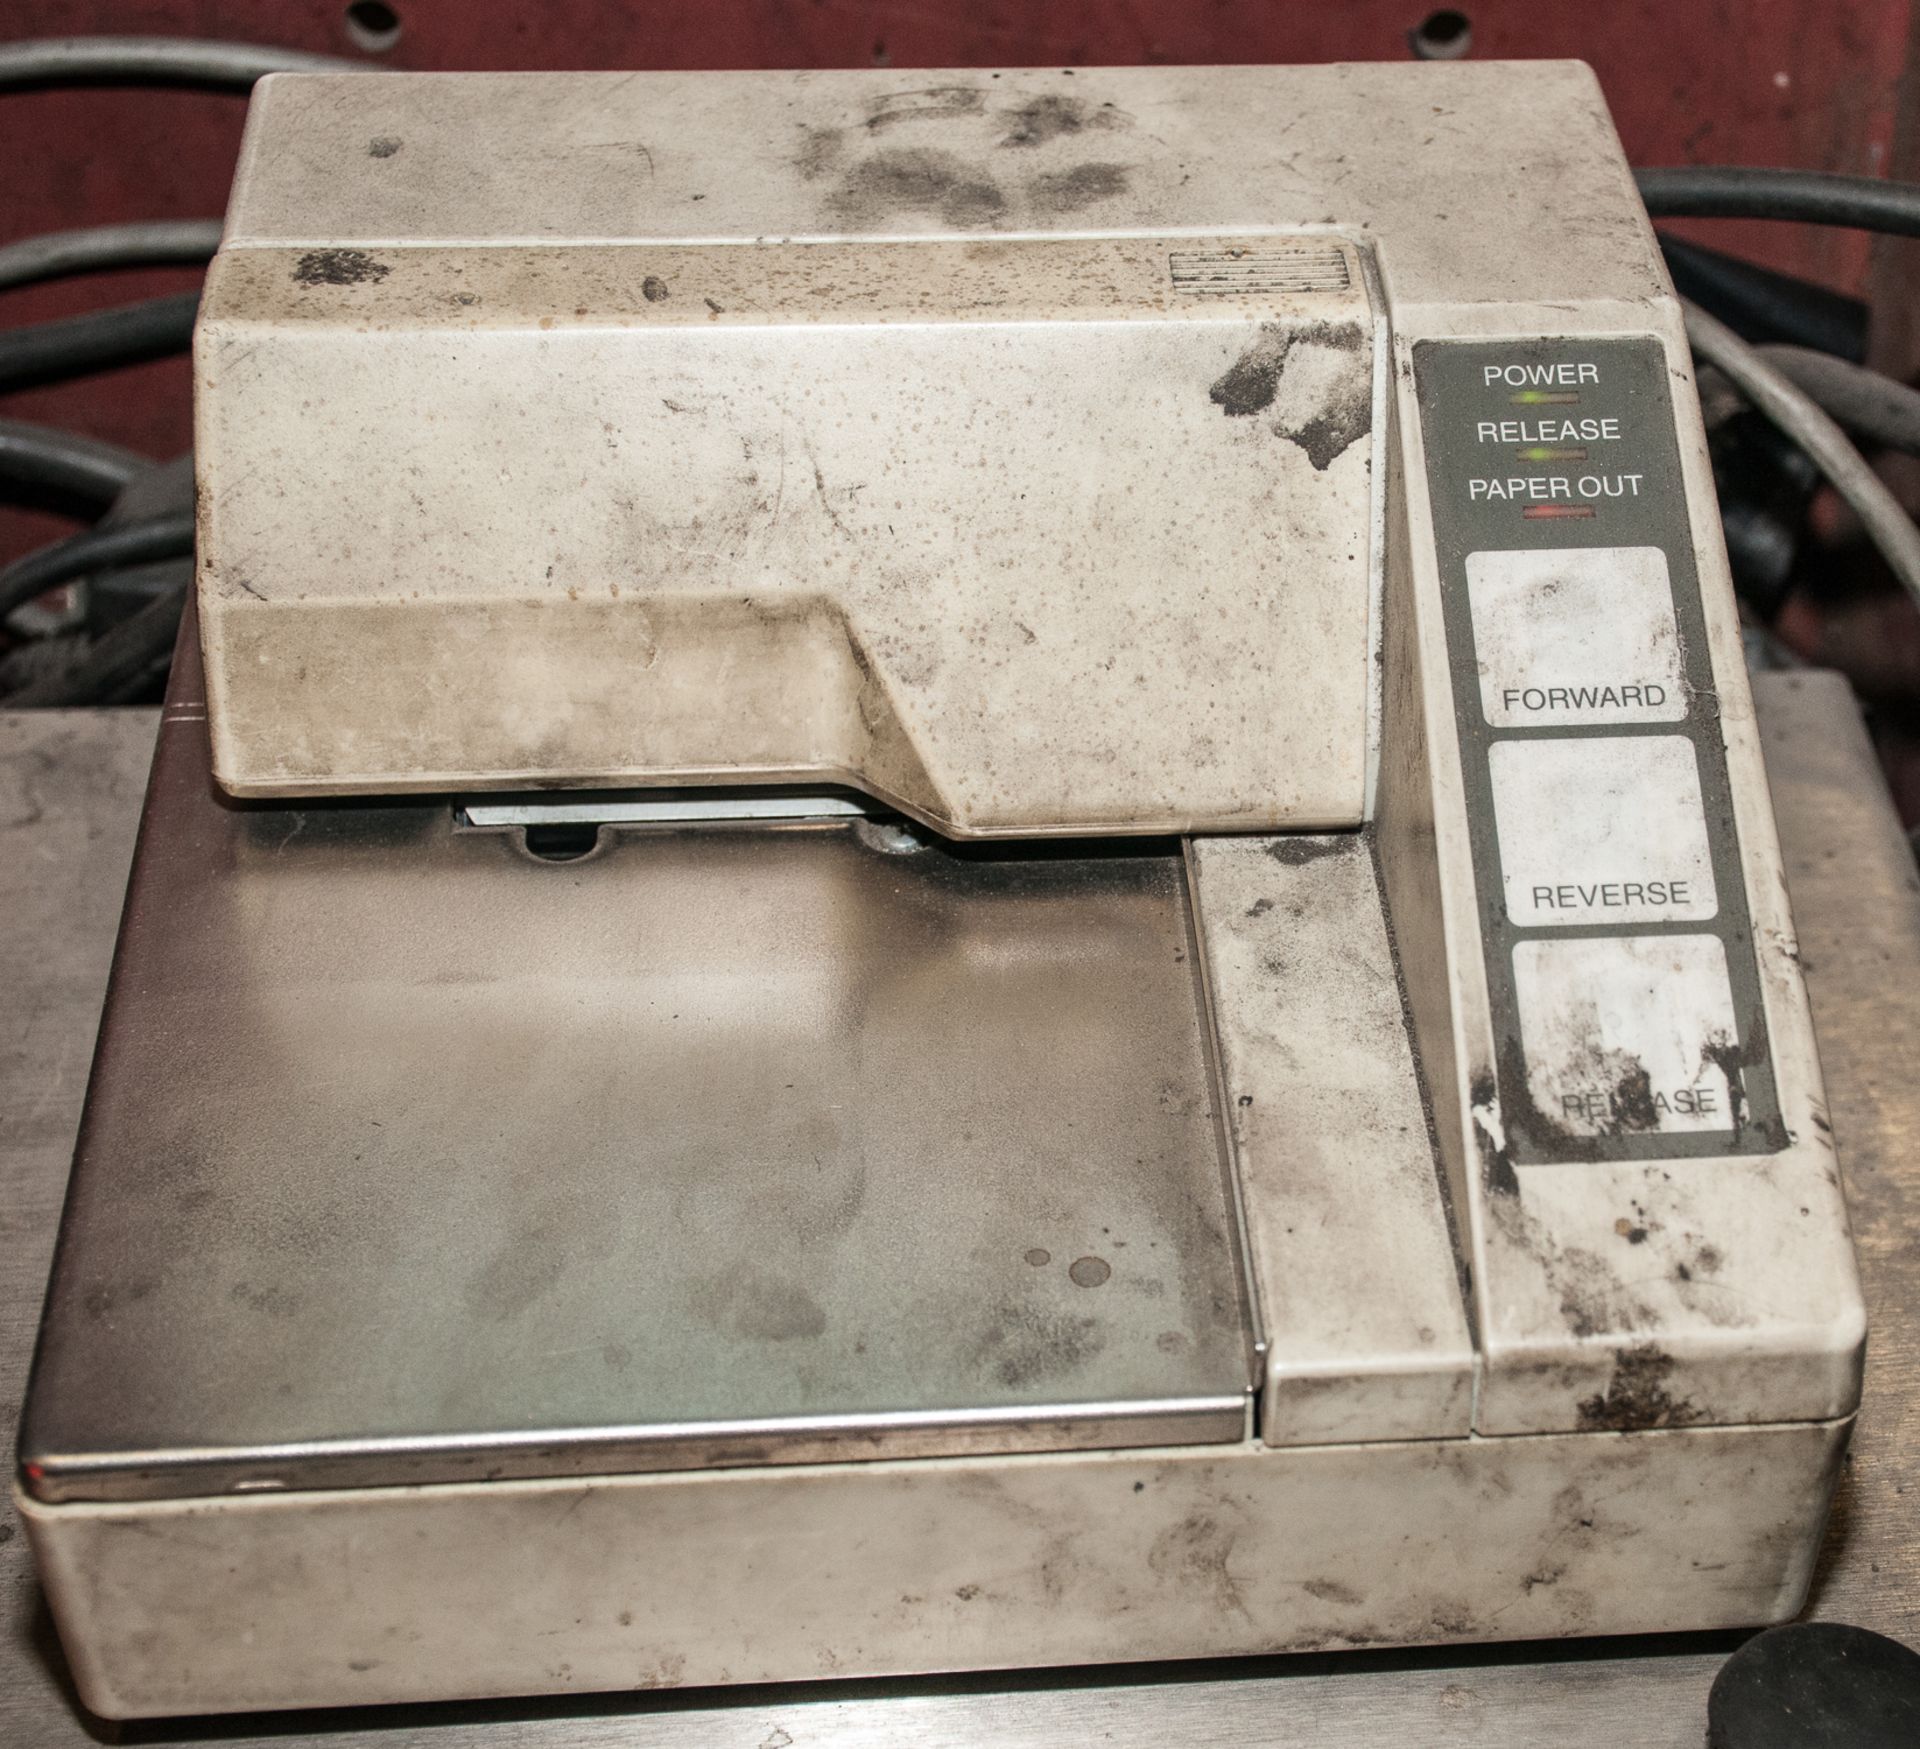 Truck Scale, 118 1/2" x 118 1/2" Platform with Fairbanks Readout Mdl. IND-R2500-F1, s/n 072890100058 - Image 6 of 7